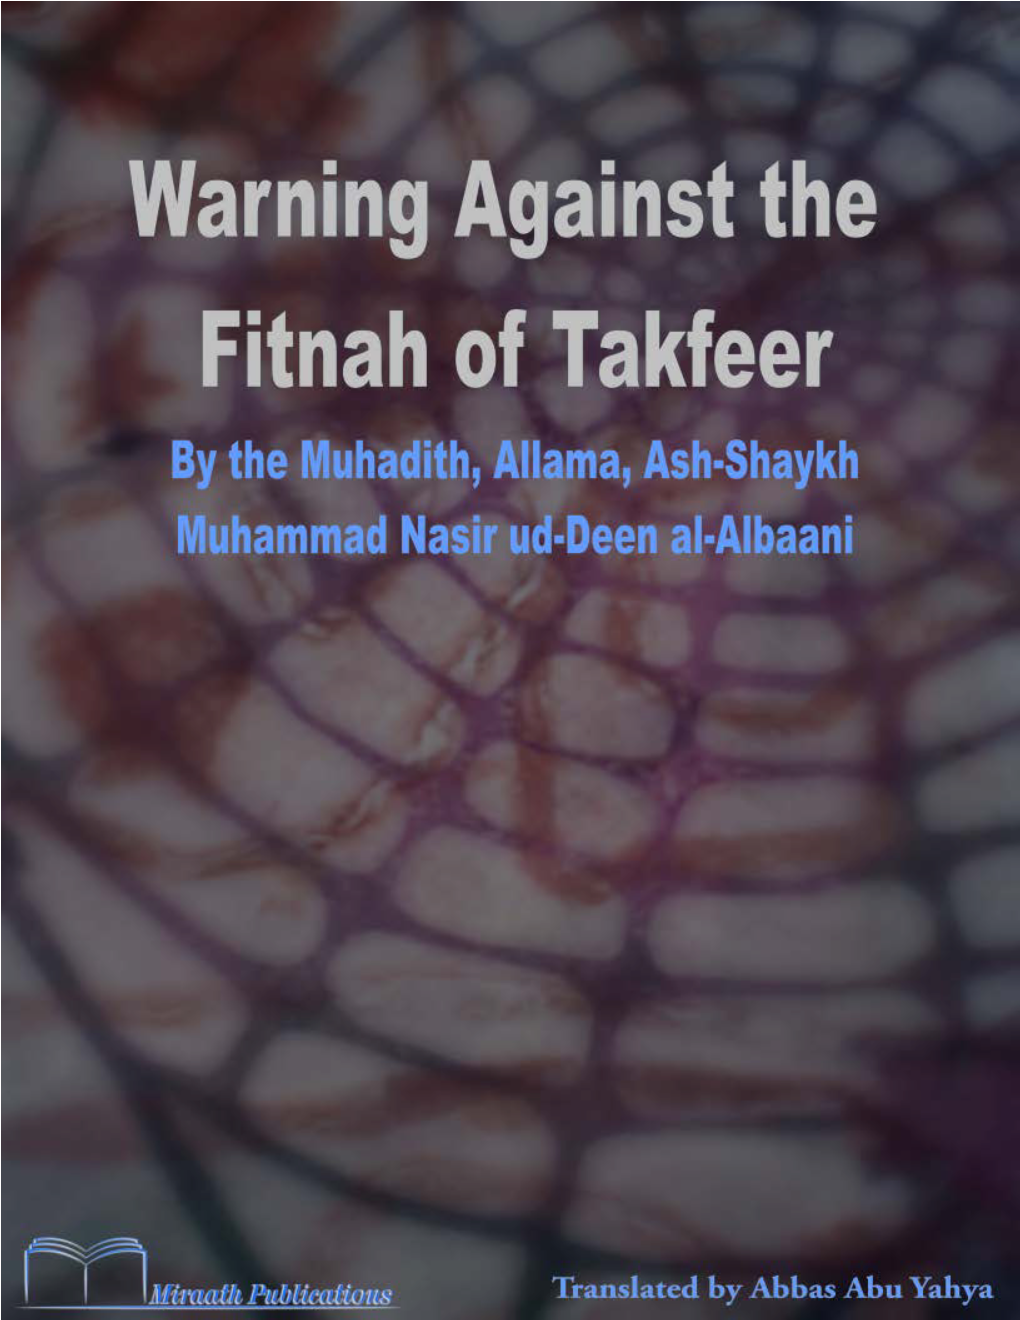 The Fitna of Takfeer